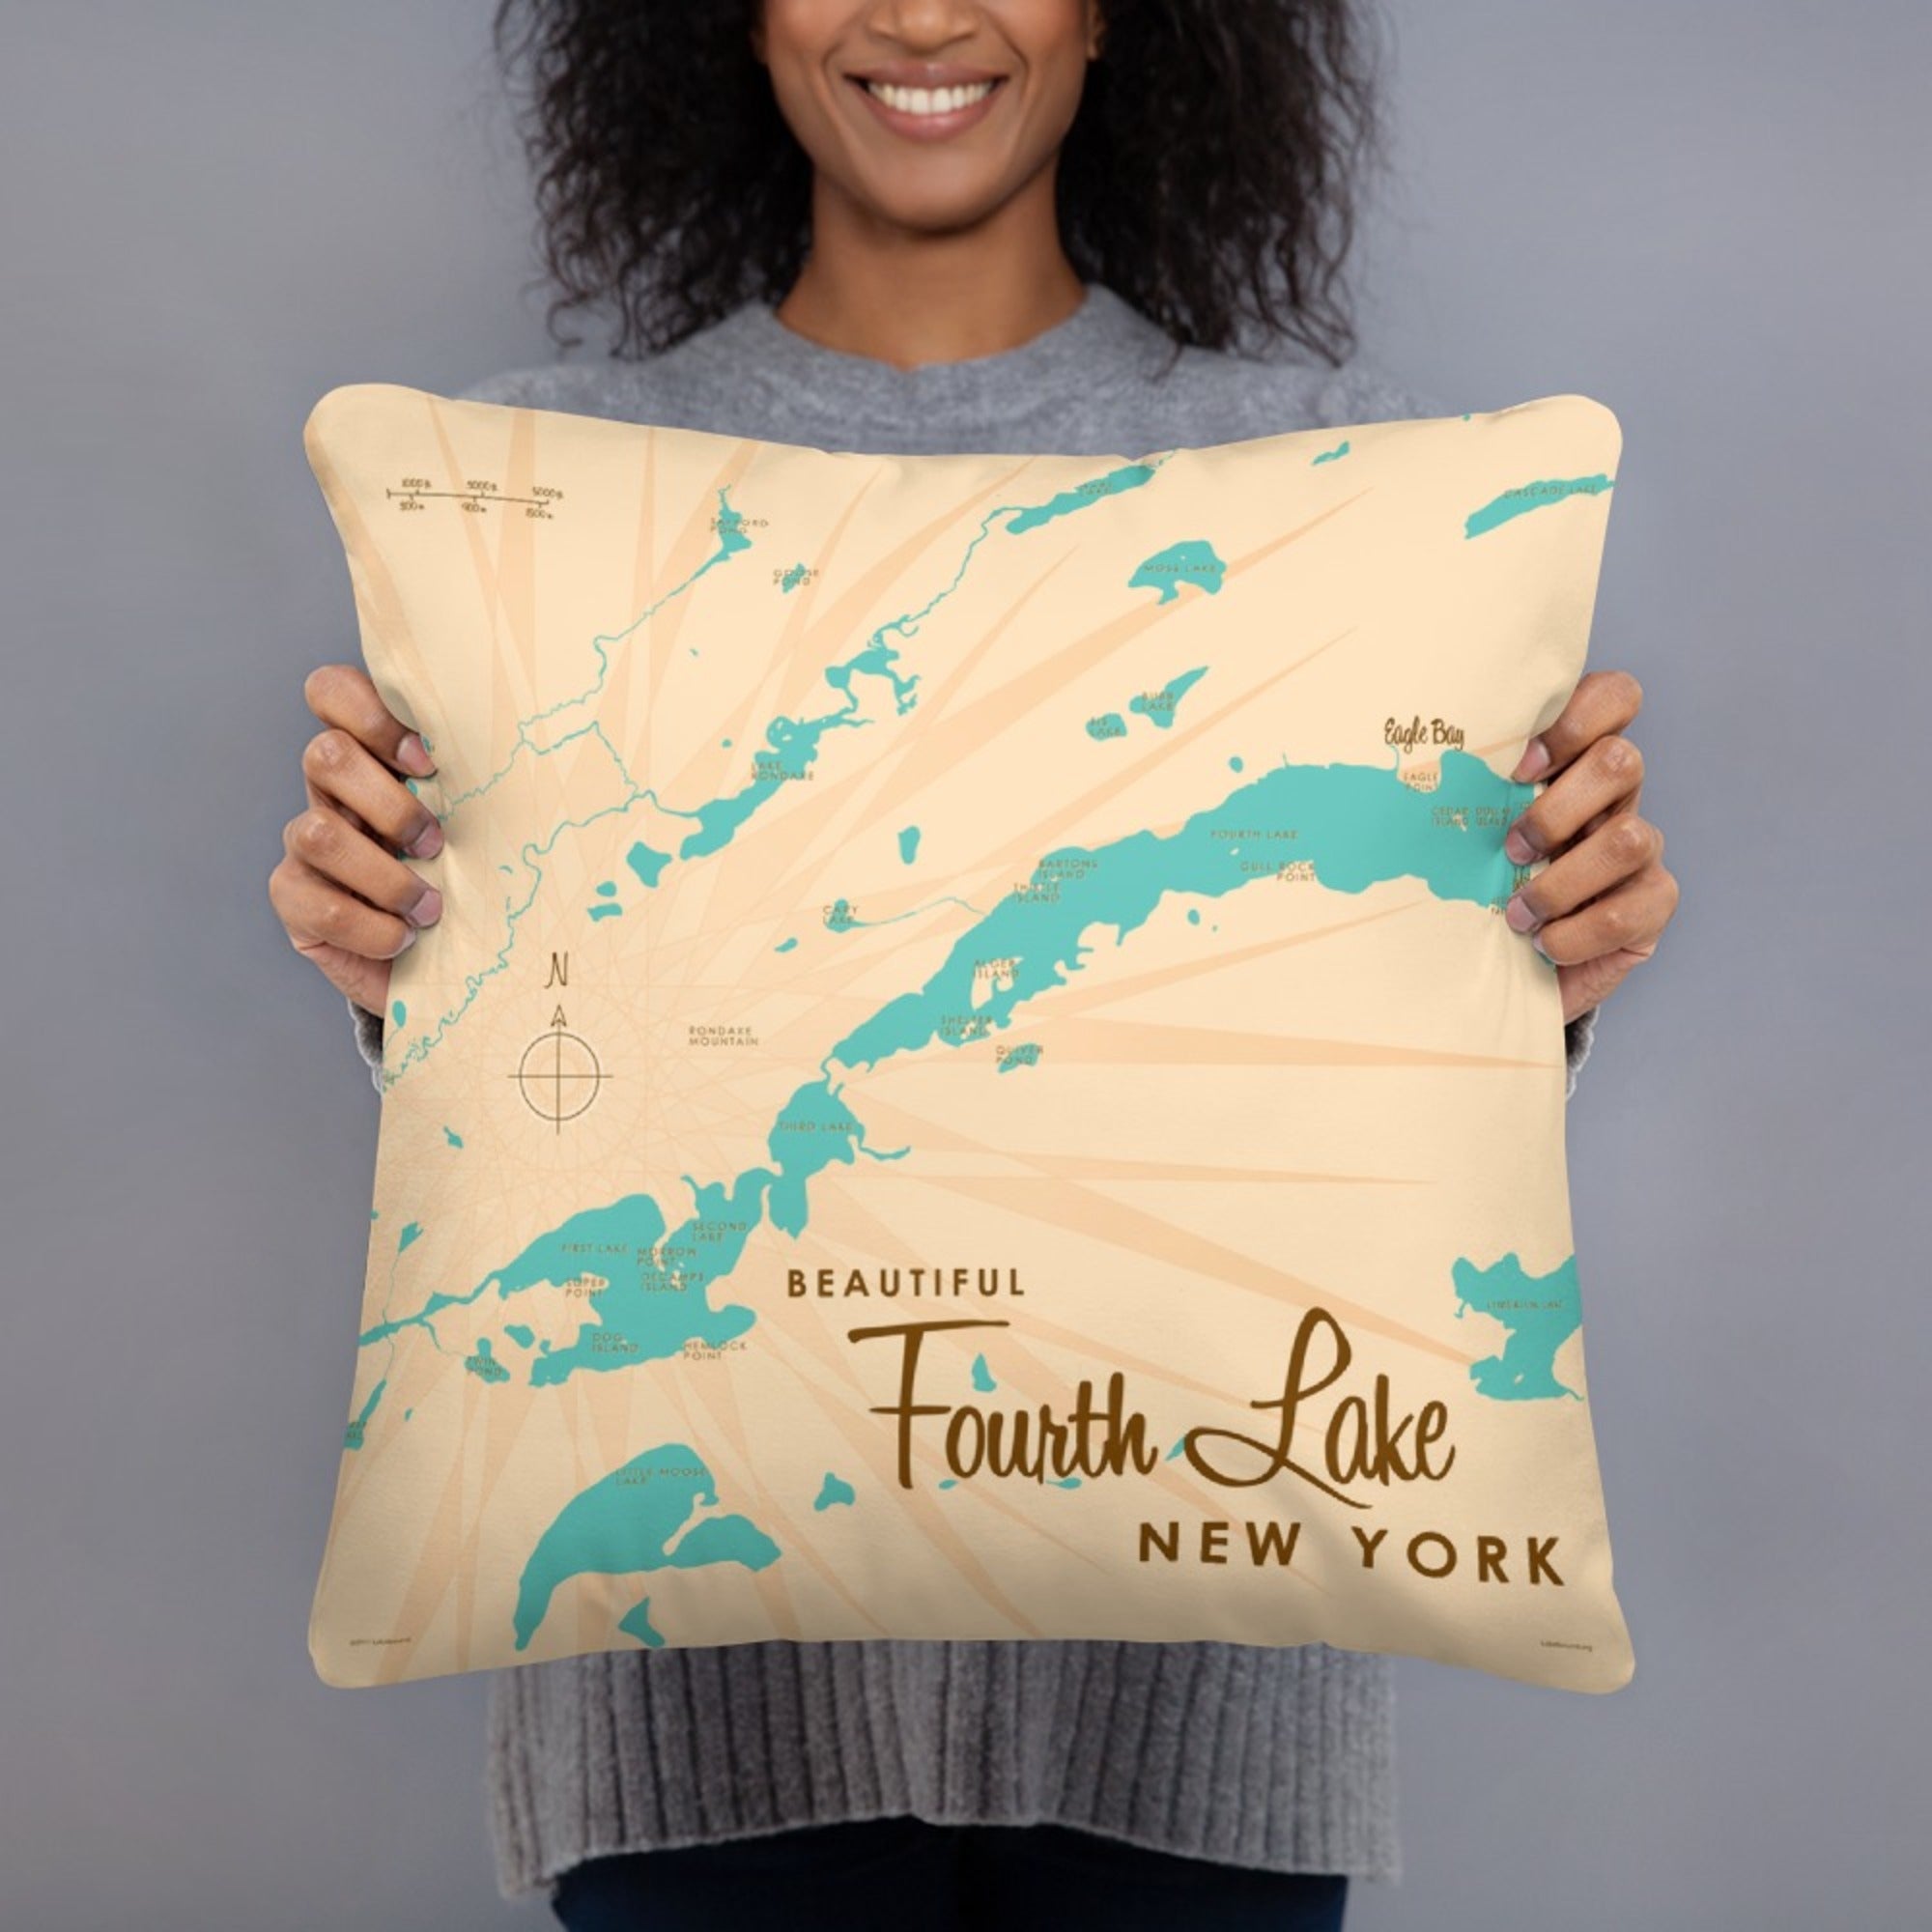 Fourth Lake New York (Herkimer County) Pillow